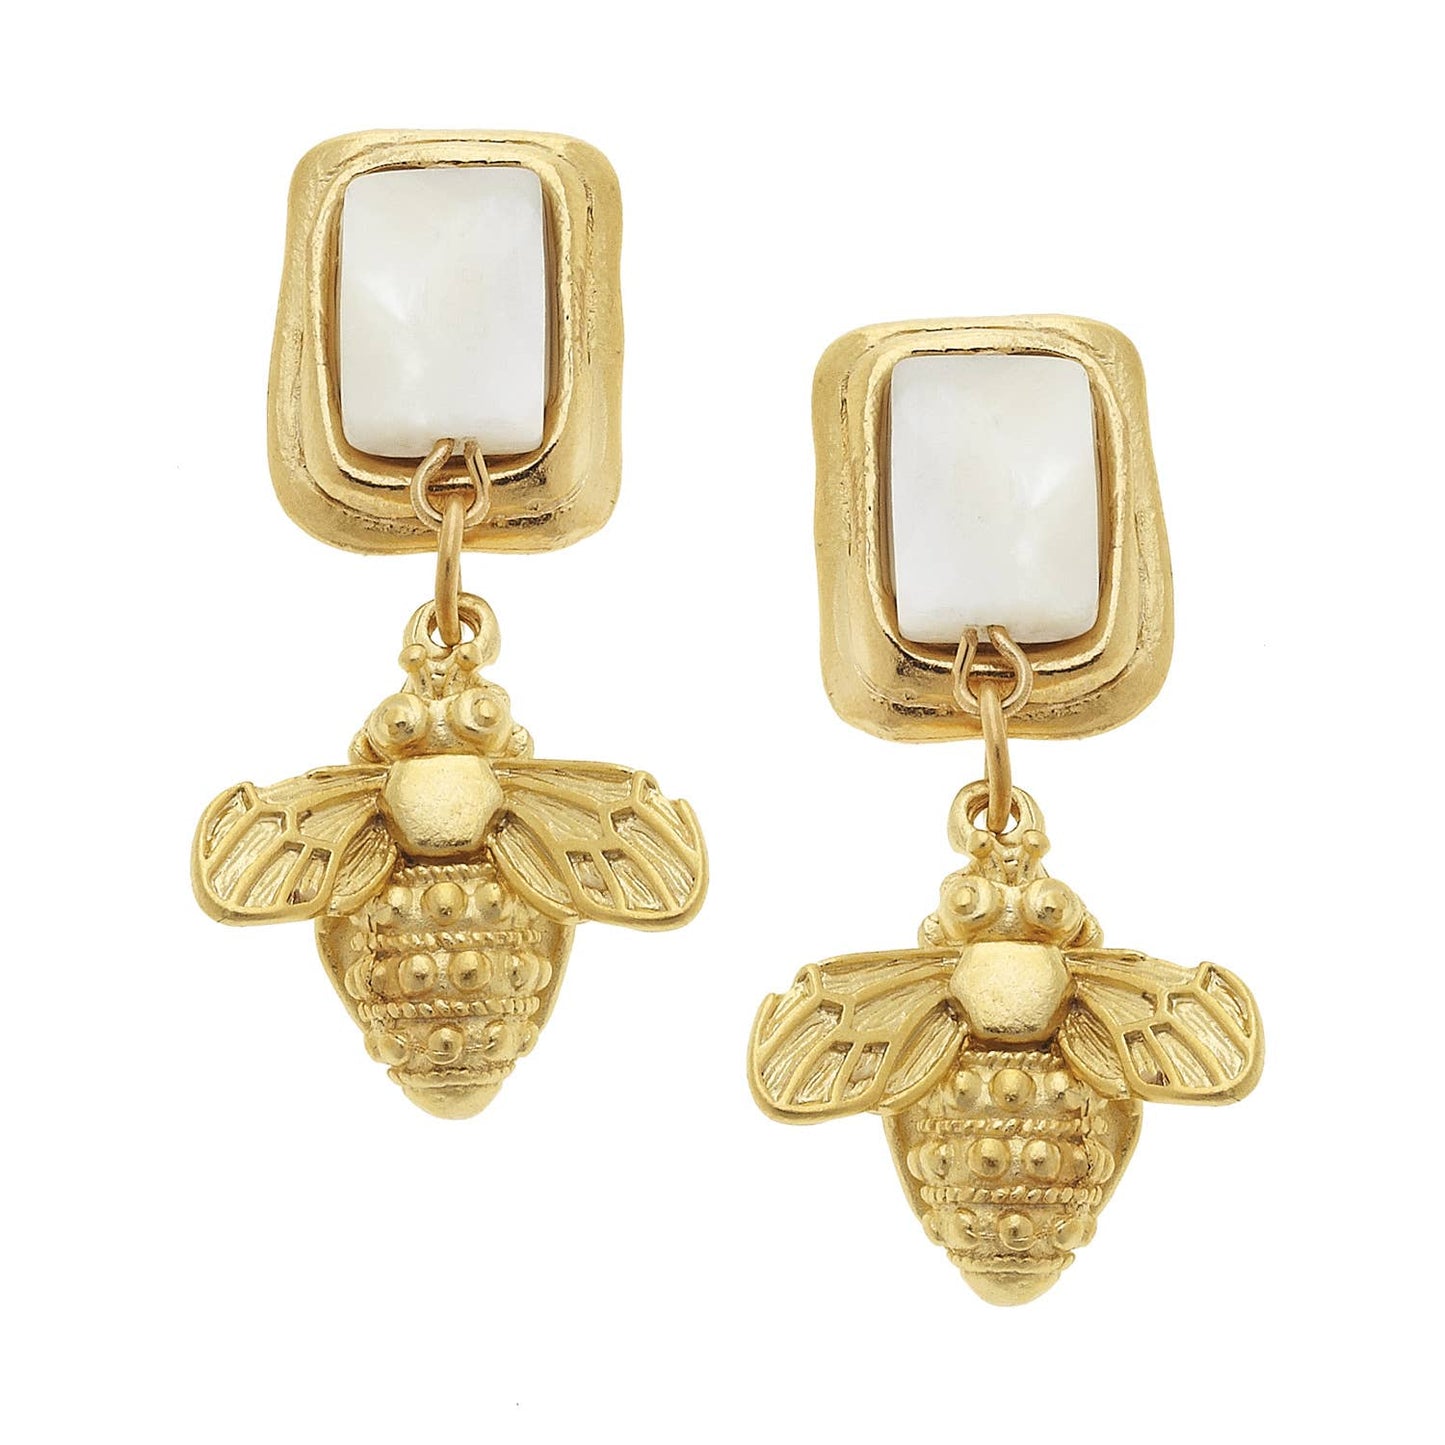 Susan Shaw - Gold Bee and Genuine Mother of Pearl Earrings - Salud HTX